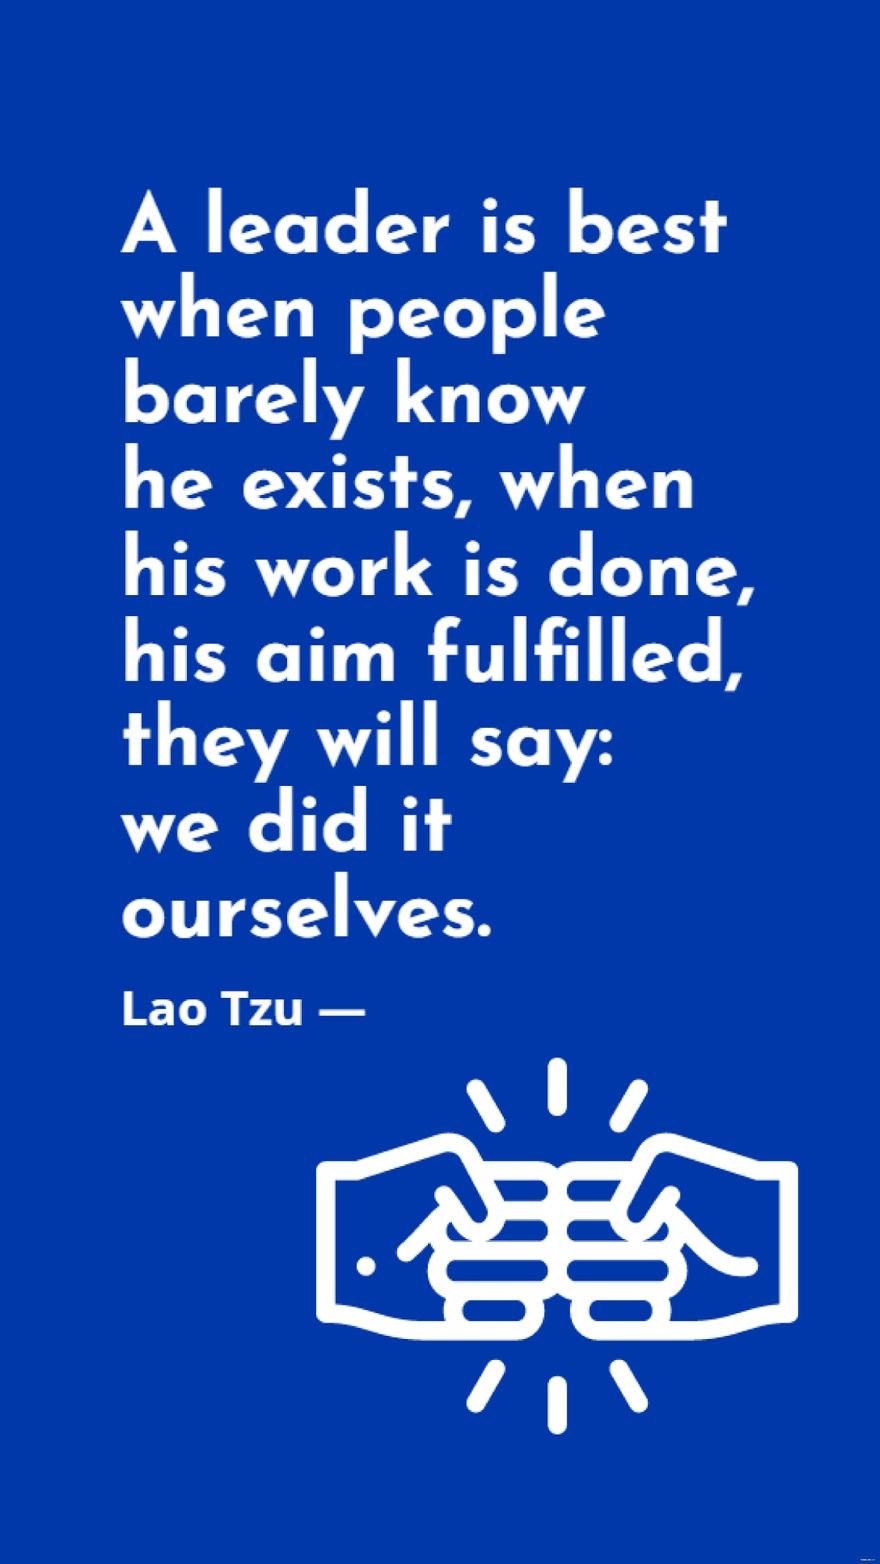 Lao Tzu - A leader is best when people barely know he exists, when his work is done, his aim fulfilled, they will say: we did it ourselves.